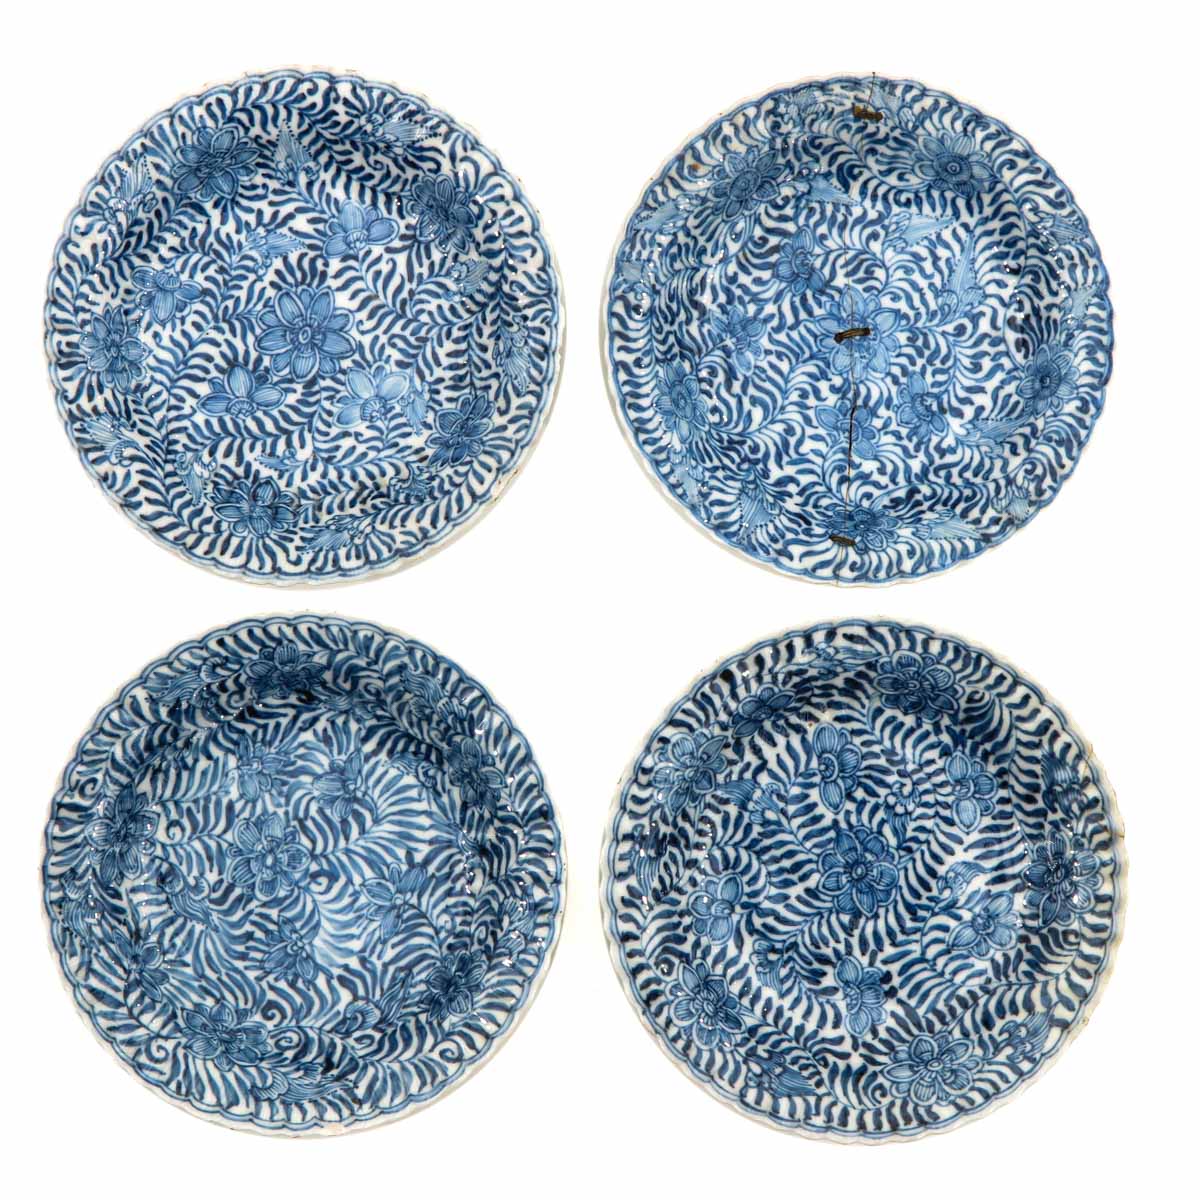 A Lot of 11 Small Blue and White Plates - Image 3 of 10